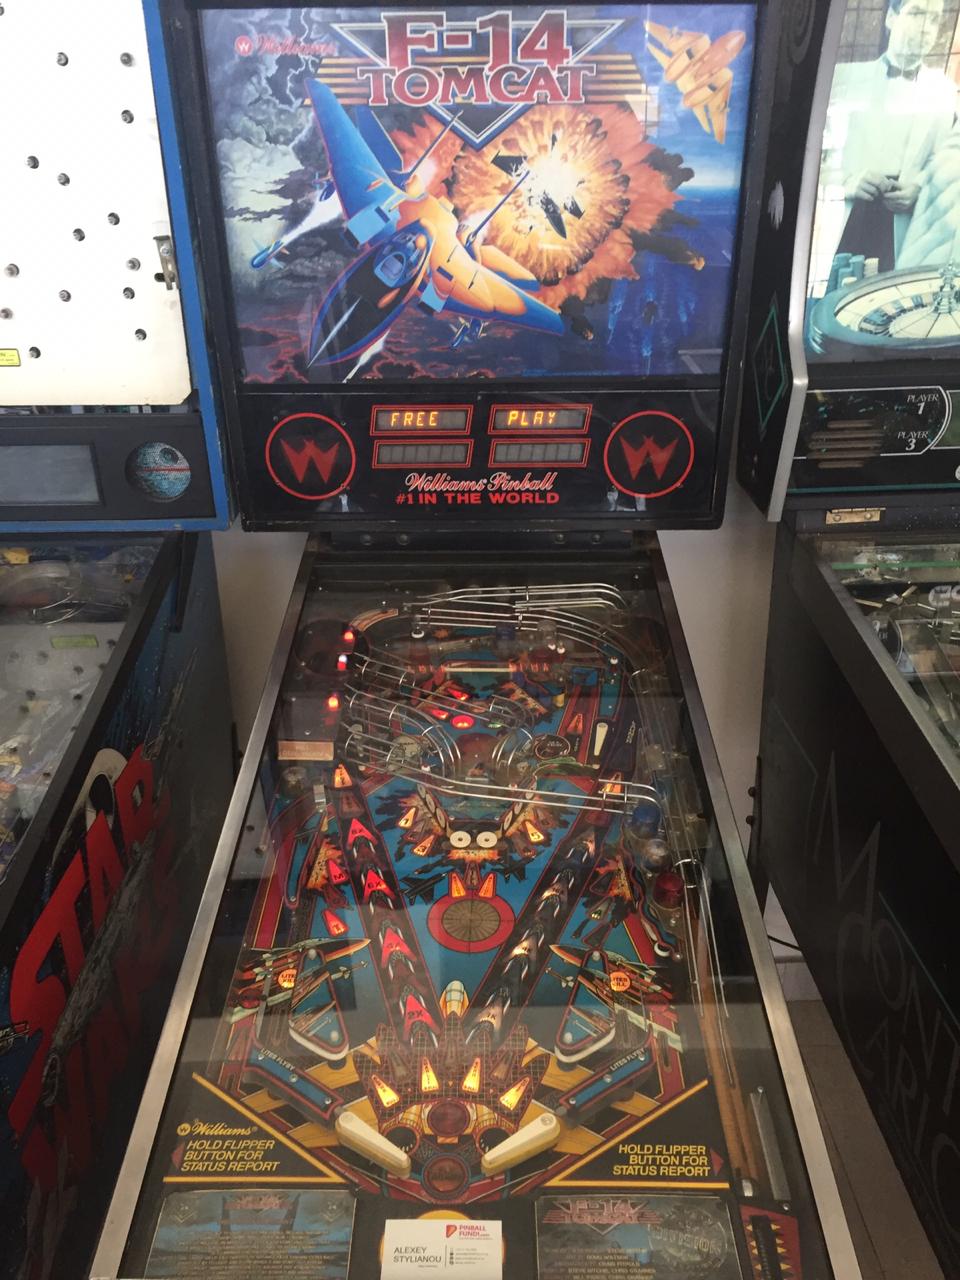 looking to buy a pinball machine